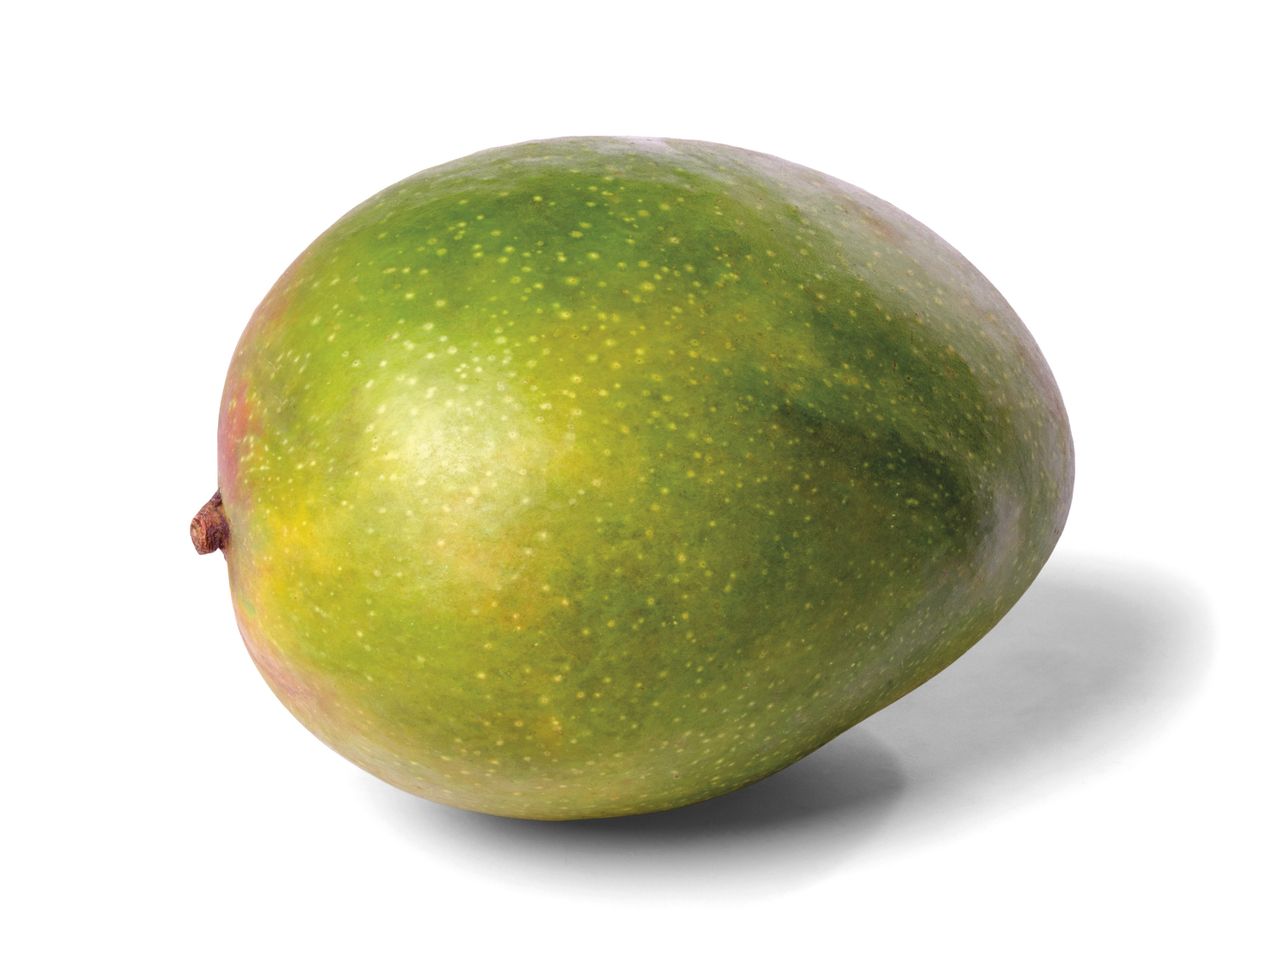 Go to full screen view: Loose Mango - Image 1